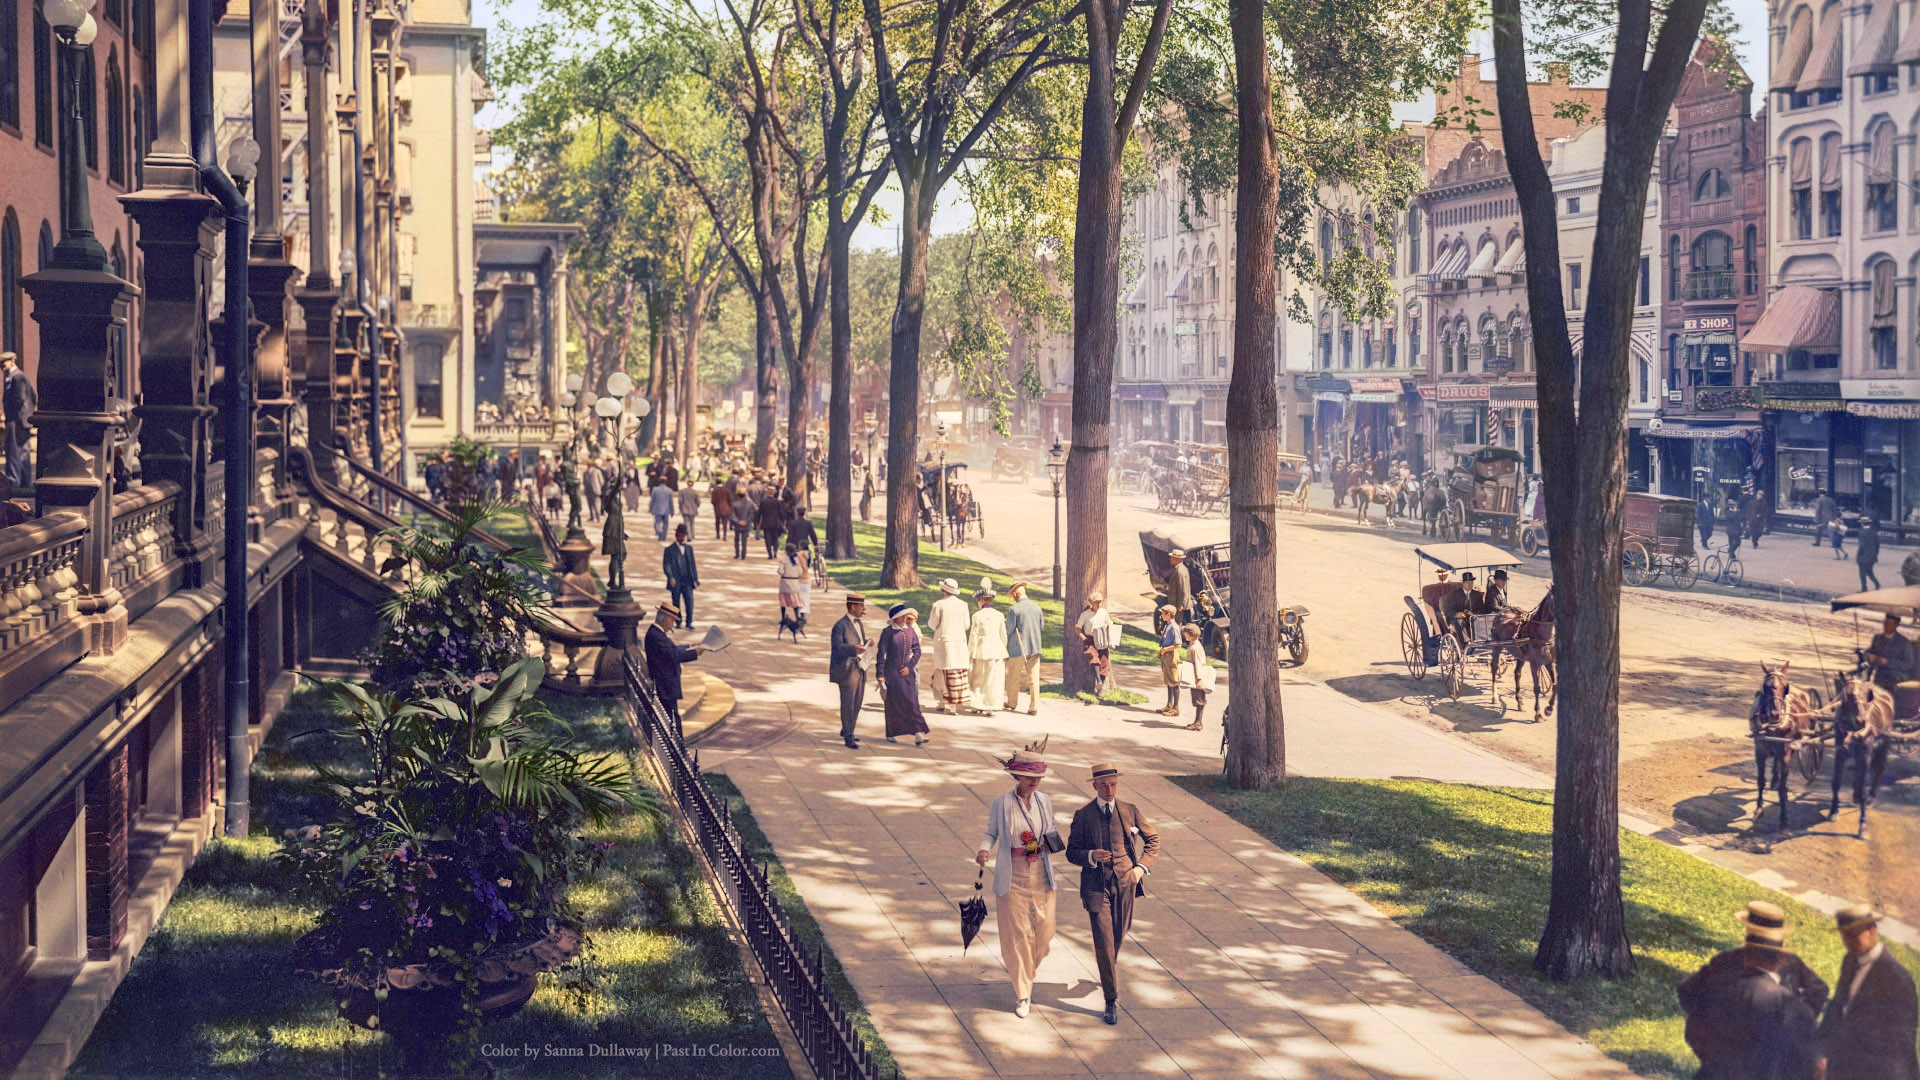 General 1920x1080 history cityscape architecture building crowds street vintage photo manipulation Broadway New York City USA trees horse colorized photos old car town people city pedestrian dappled sunlight photography idyllic watermarked